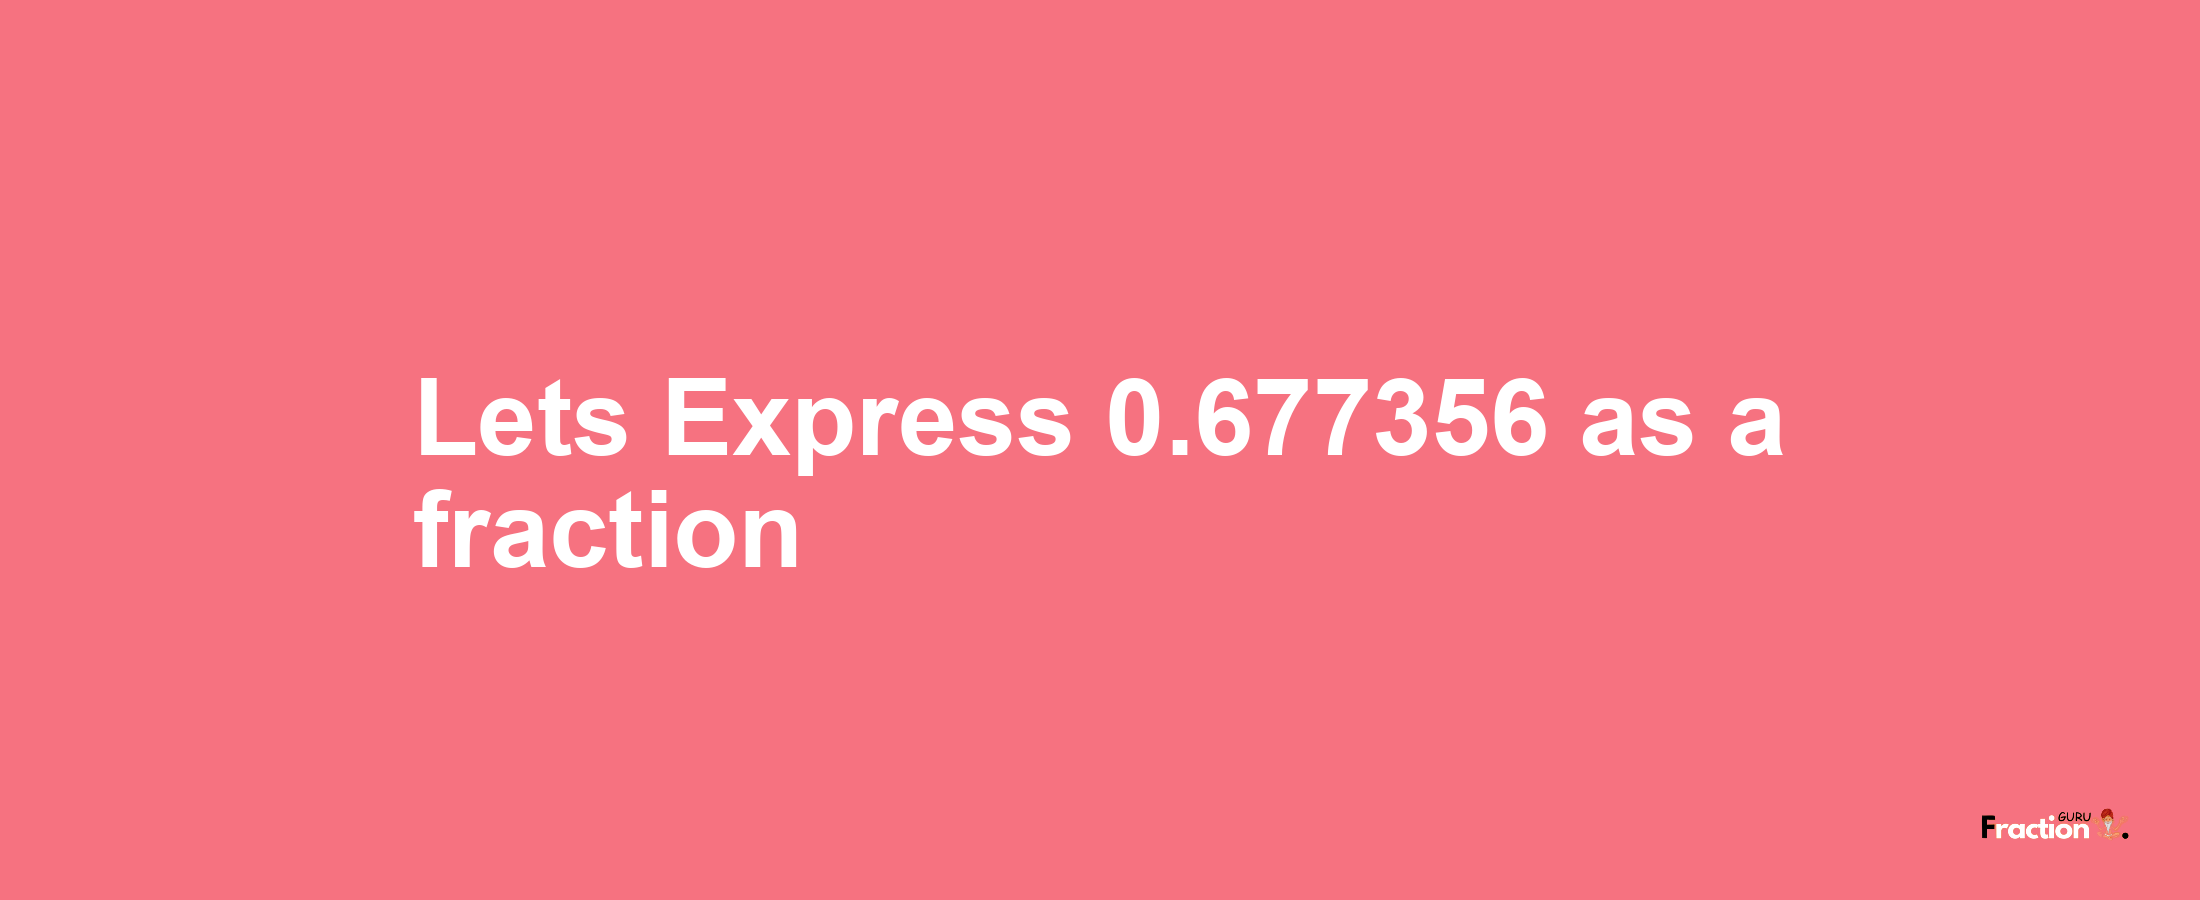 Lets Express 0.677356 as afraction